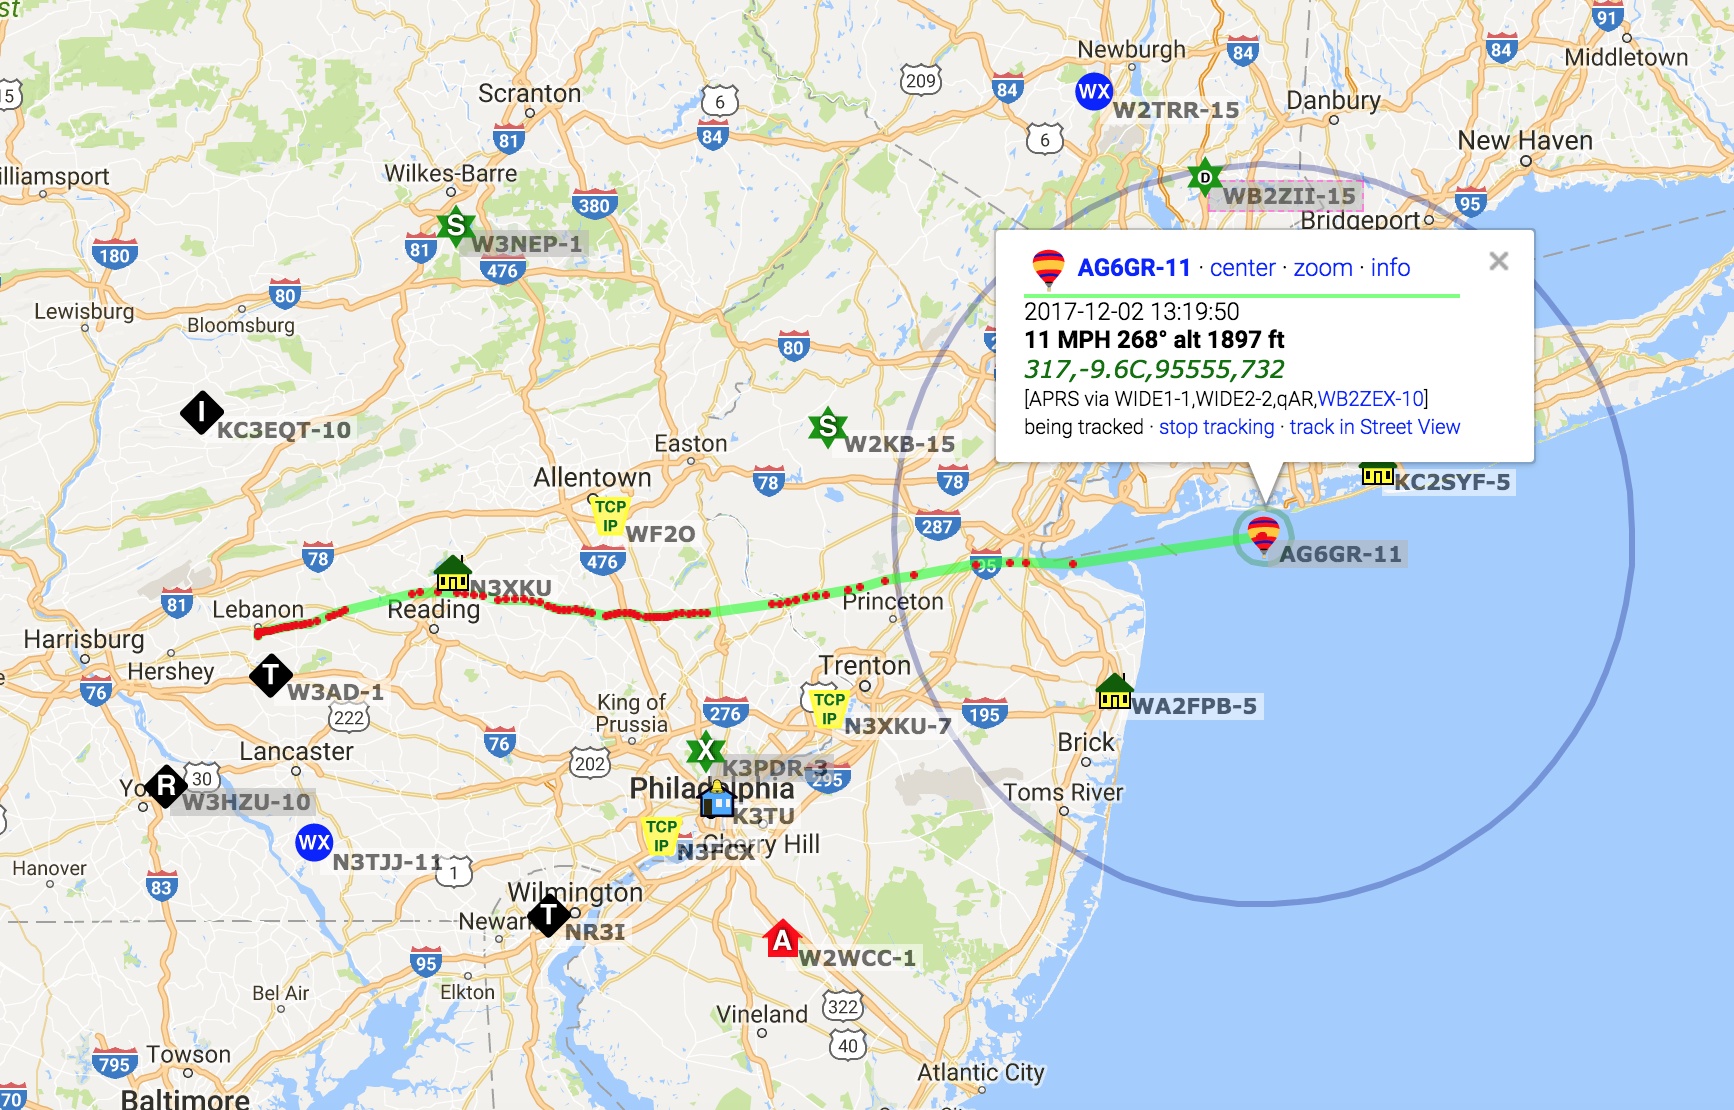 APRS tracking map